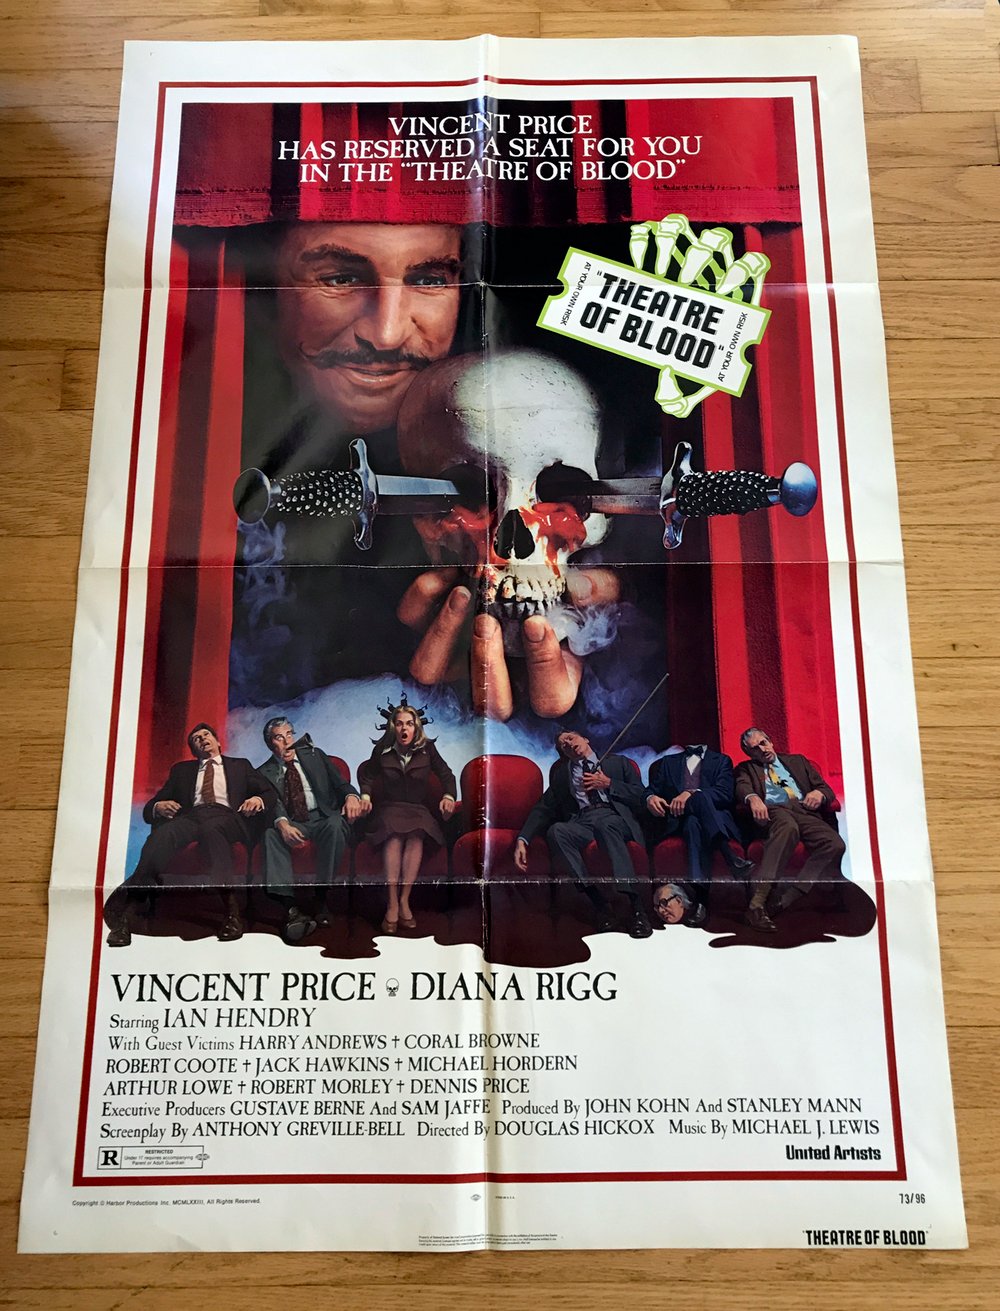 1973 THEATER OF BLOOD Original U.S. One Sheet Movie Poster